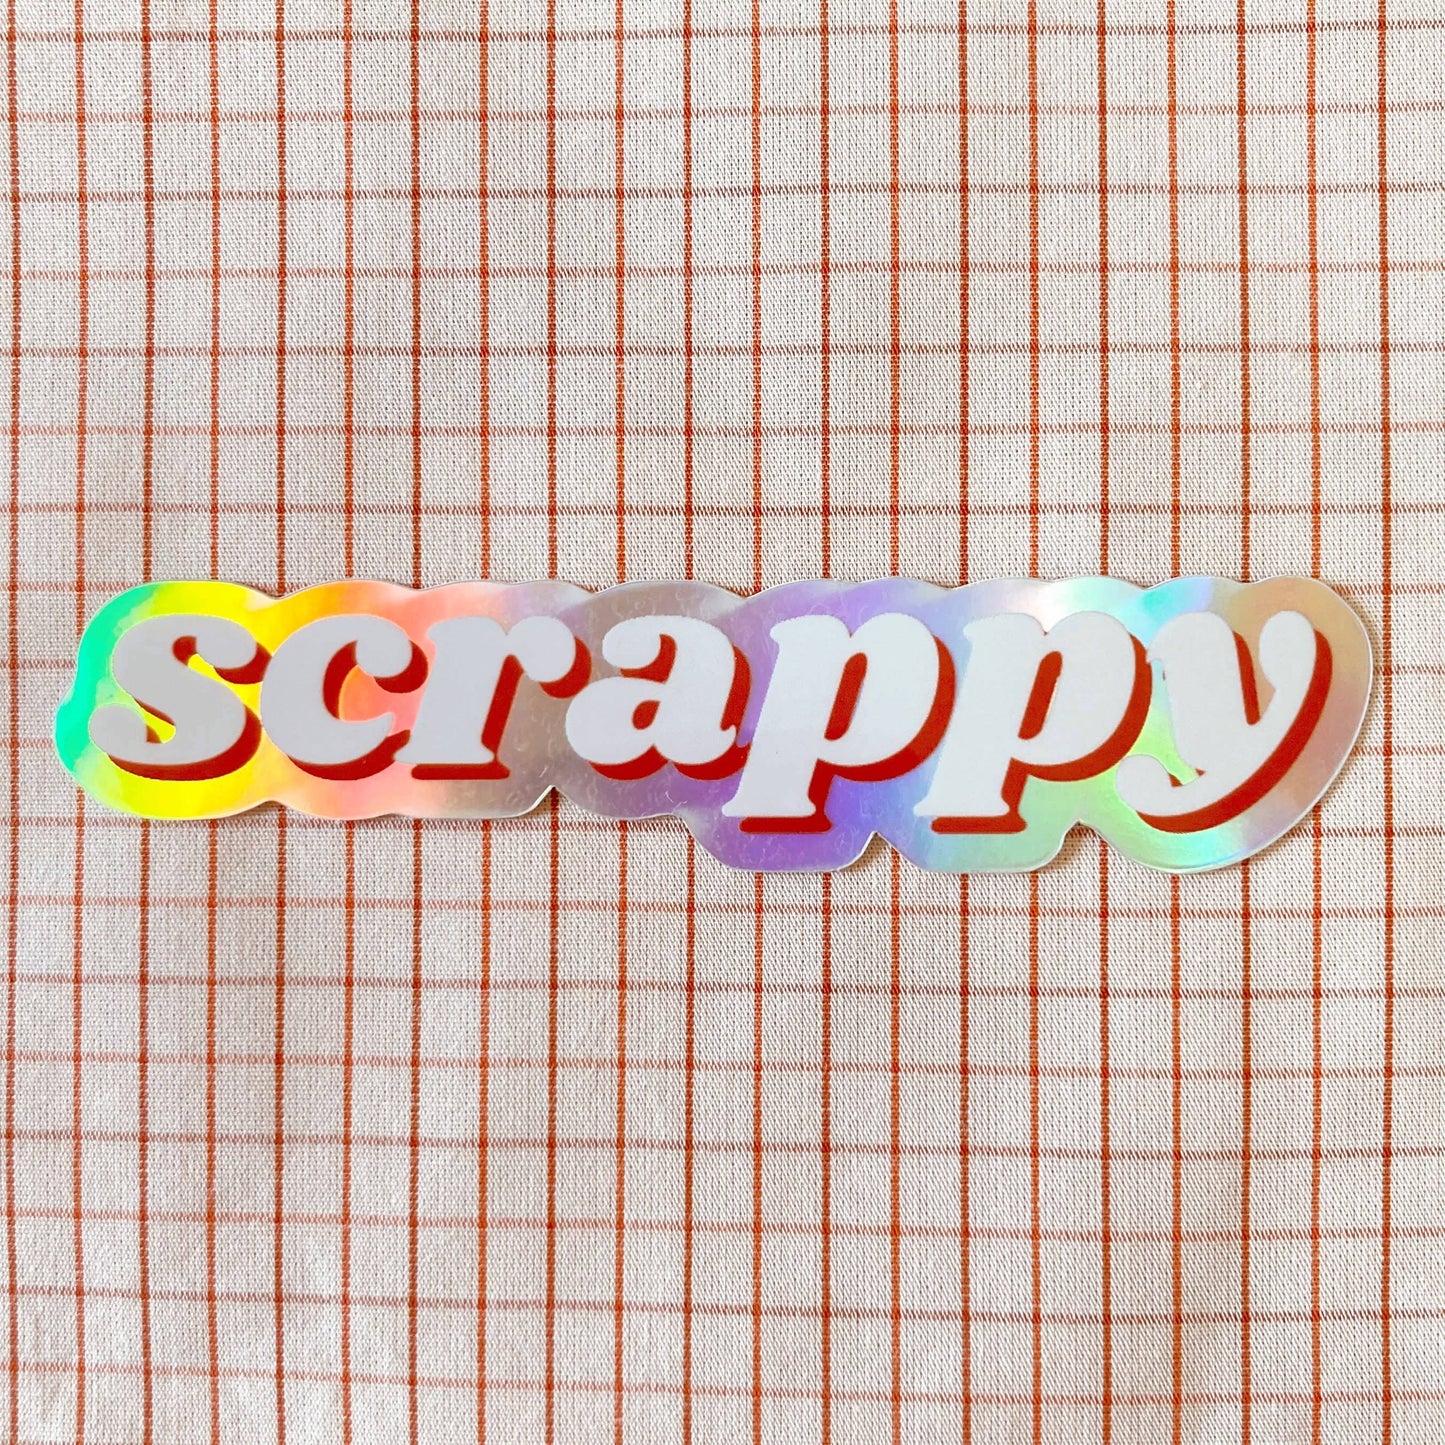 Scrappy Holographic Sewing And Quilting Vinyl Sticker